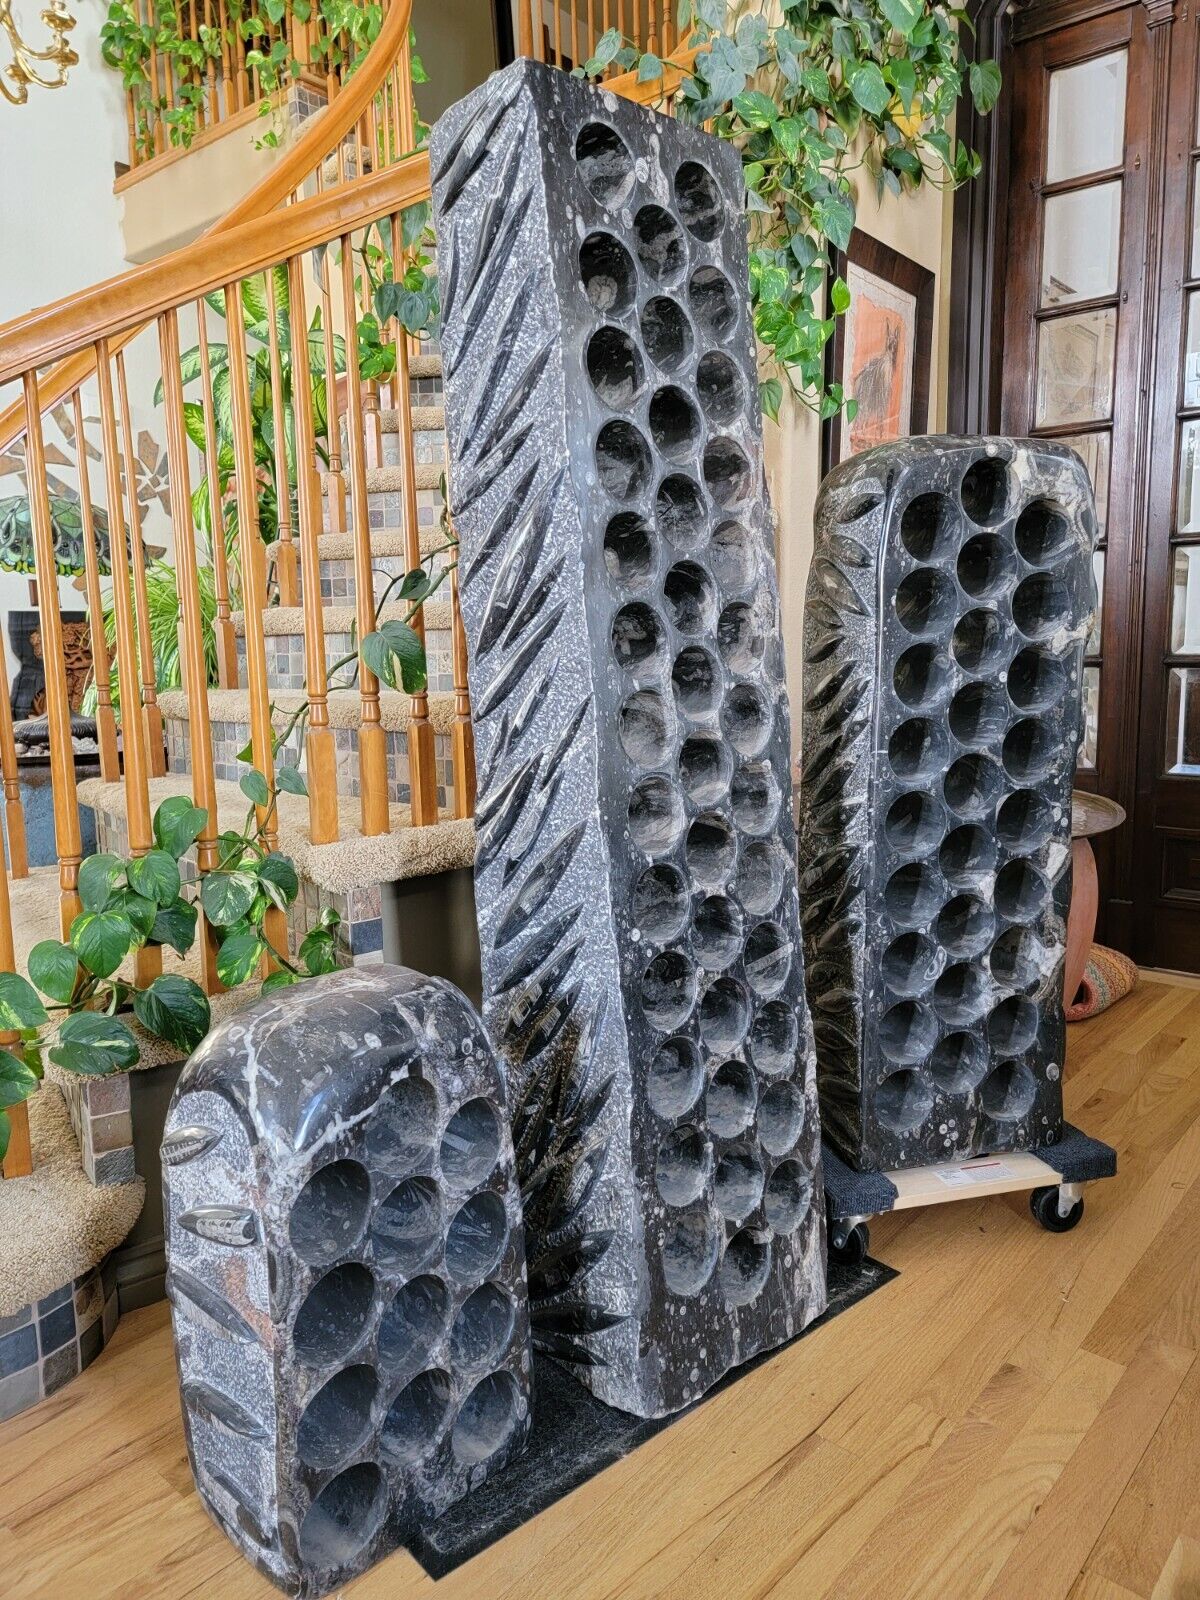 Incredible Orthoceras Wine Racks solid stone hand made one of a kind specimans